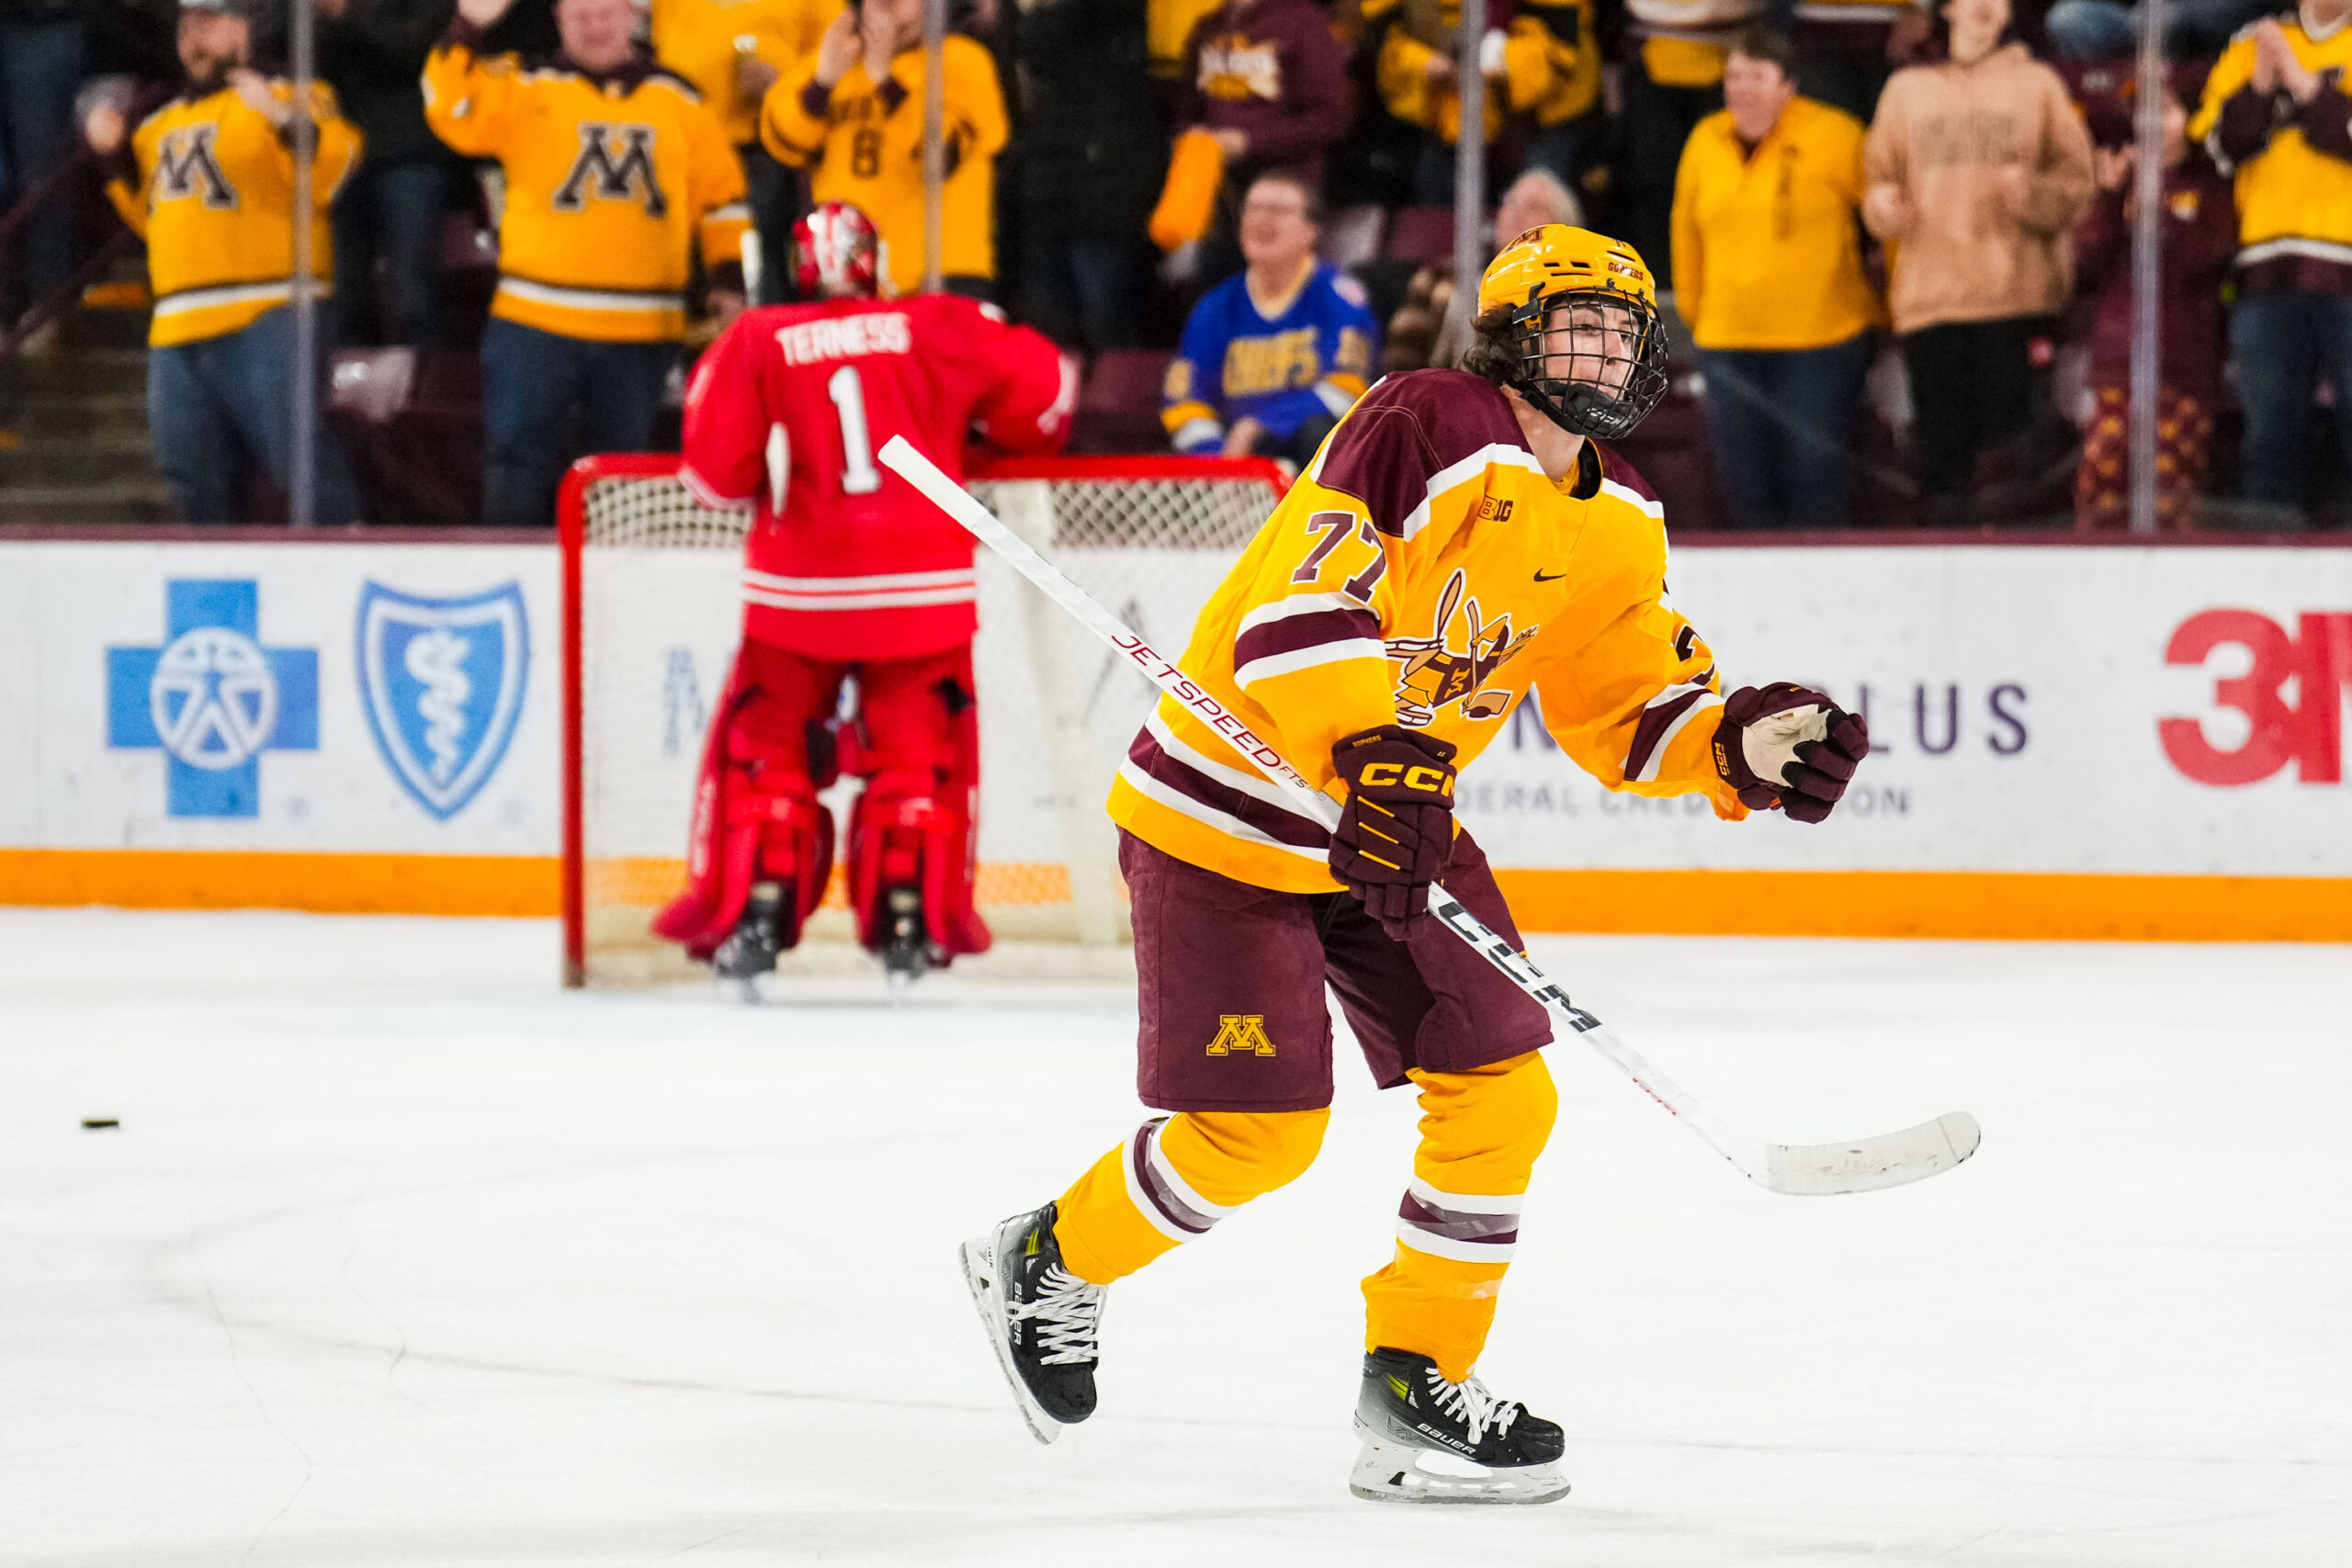 Gophers Get First Conference Sweep of Season with 6-3 Win Over Buckeyes